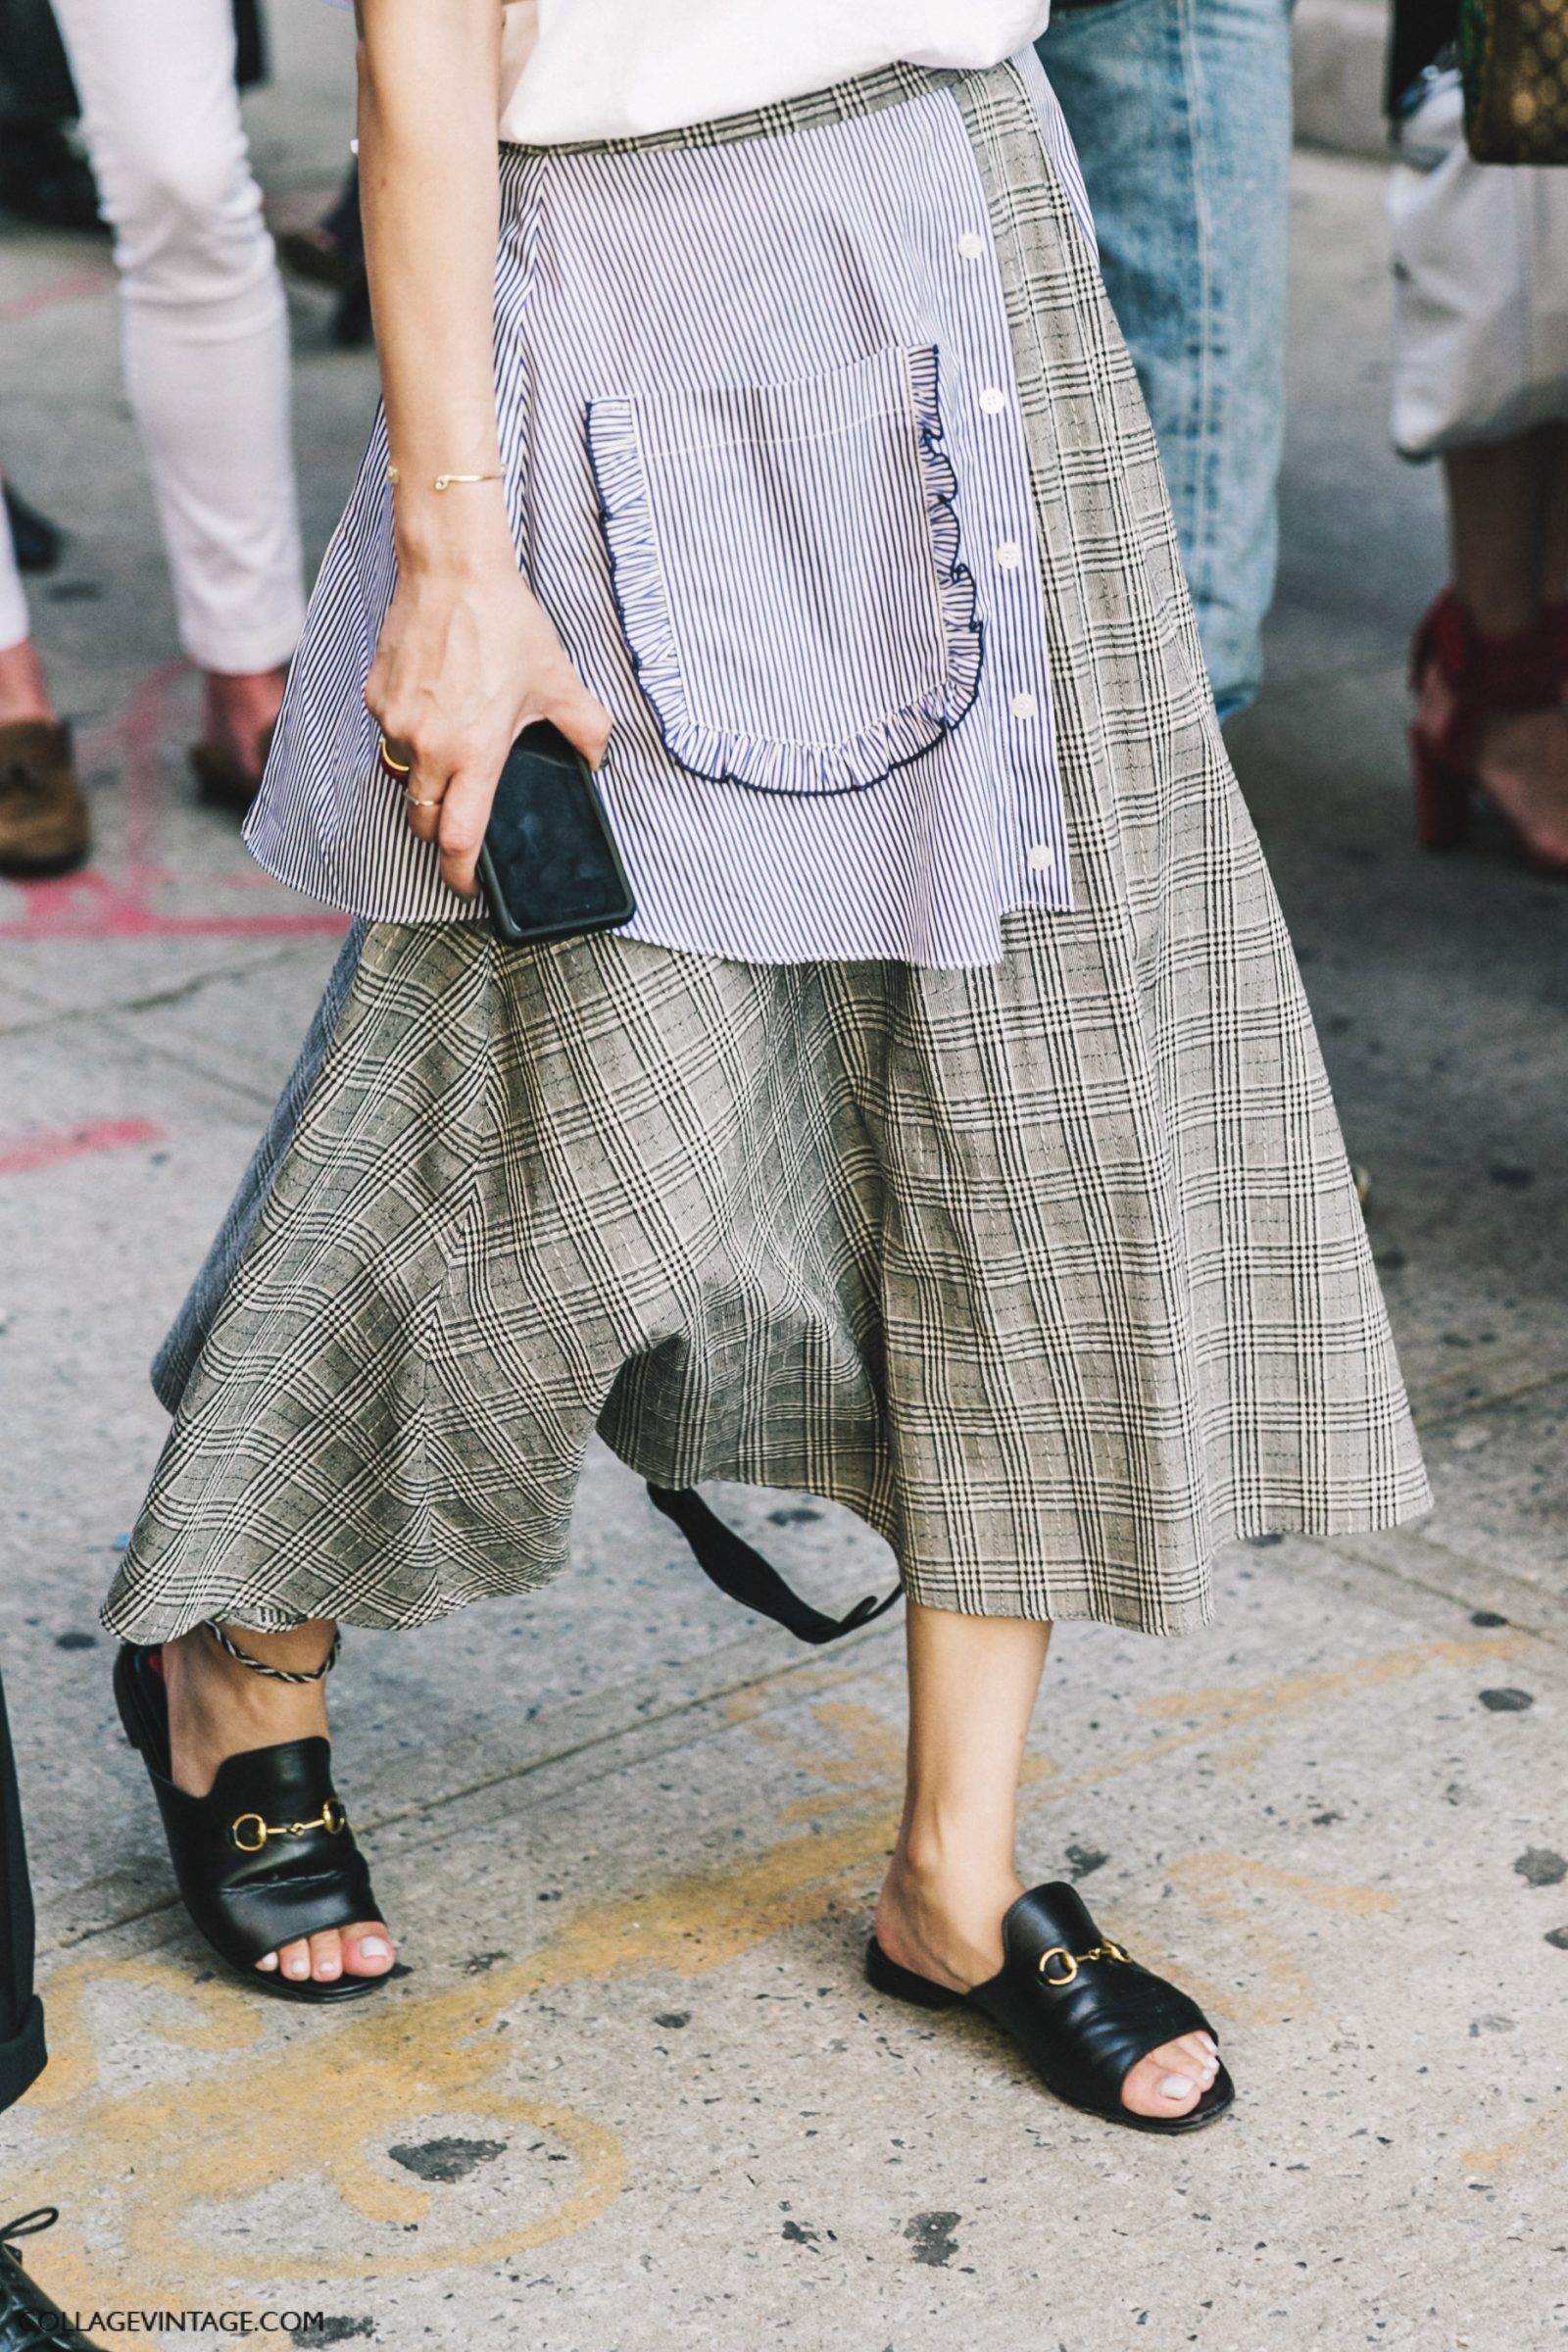 nyfw-new_york_fashion_week_ss17-street_style-outfits-collage_vintage-gucci_sandals